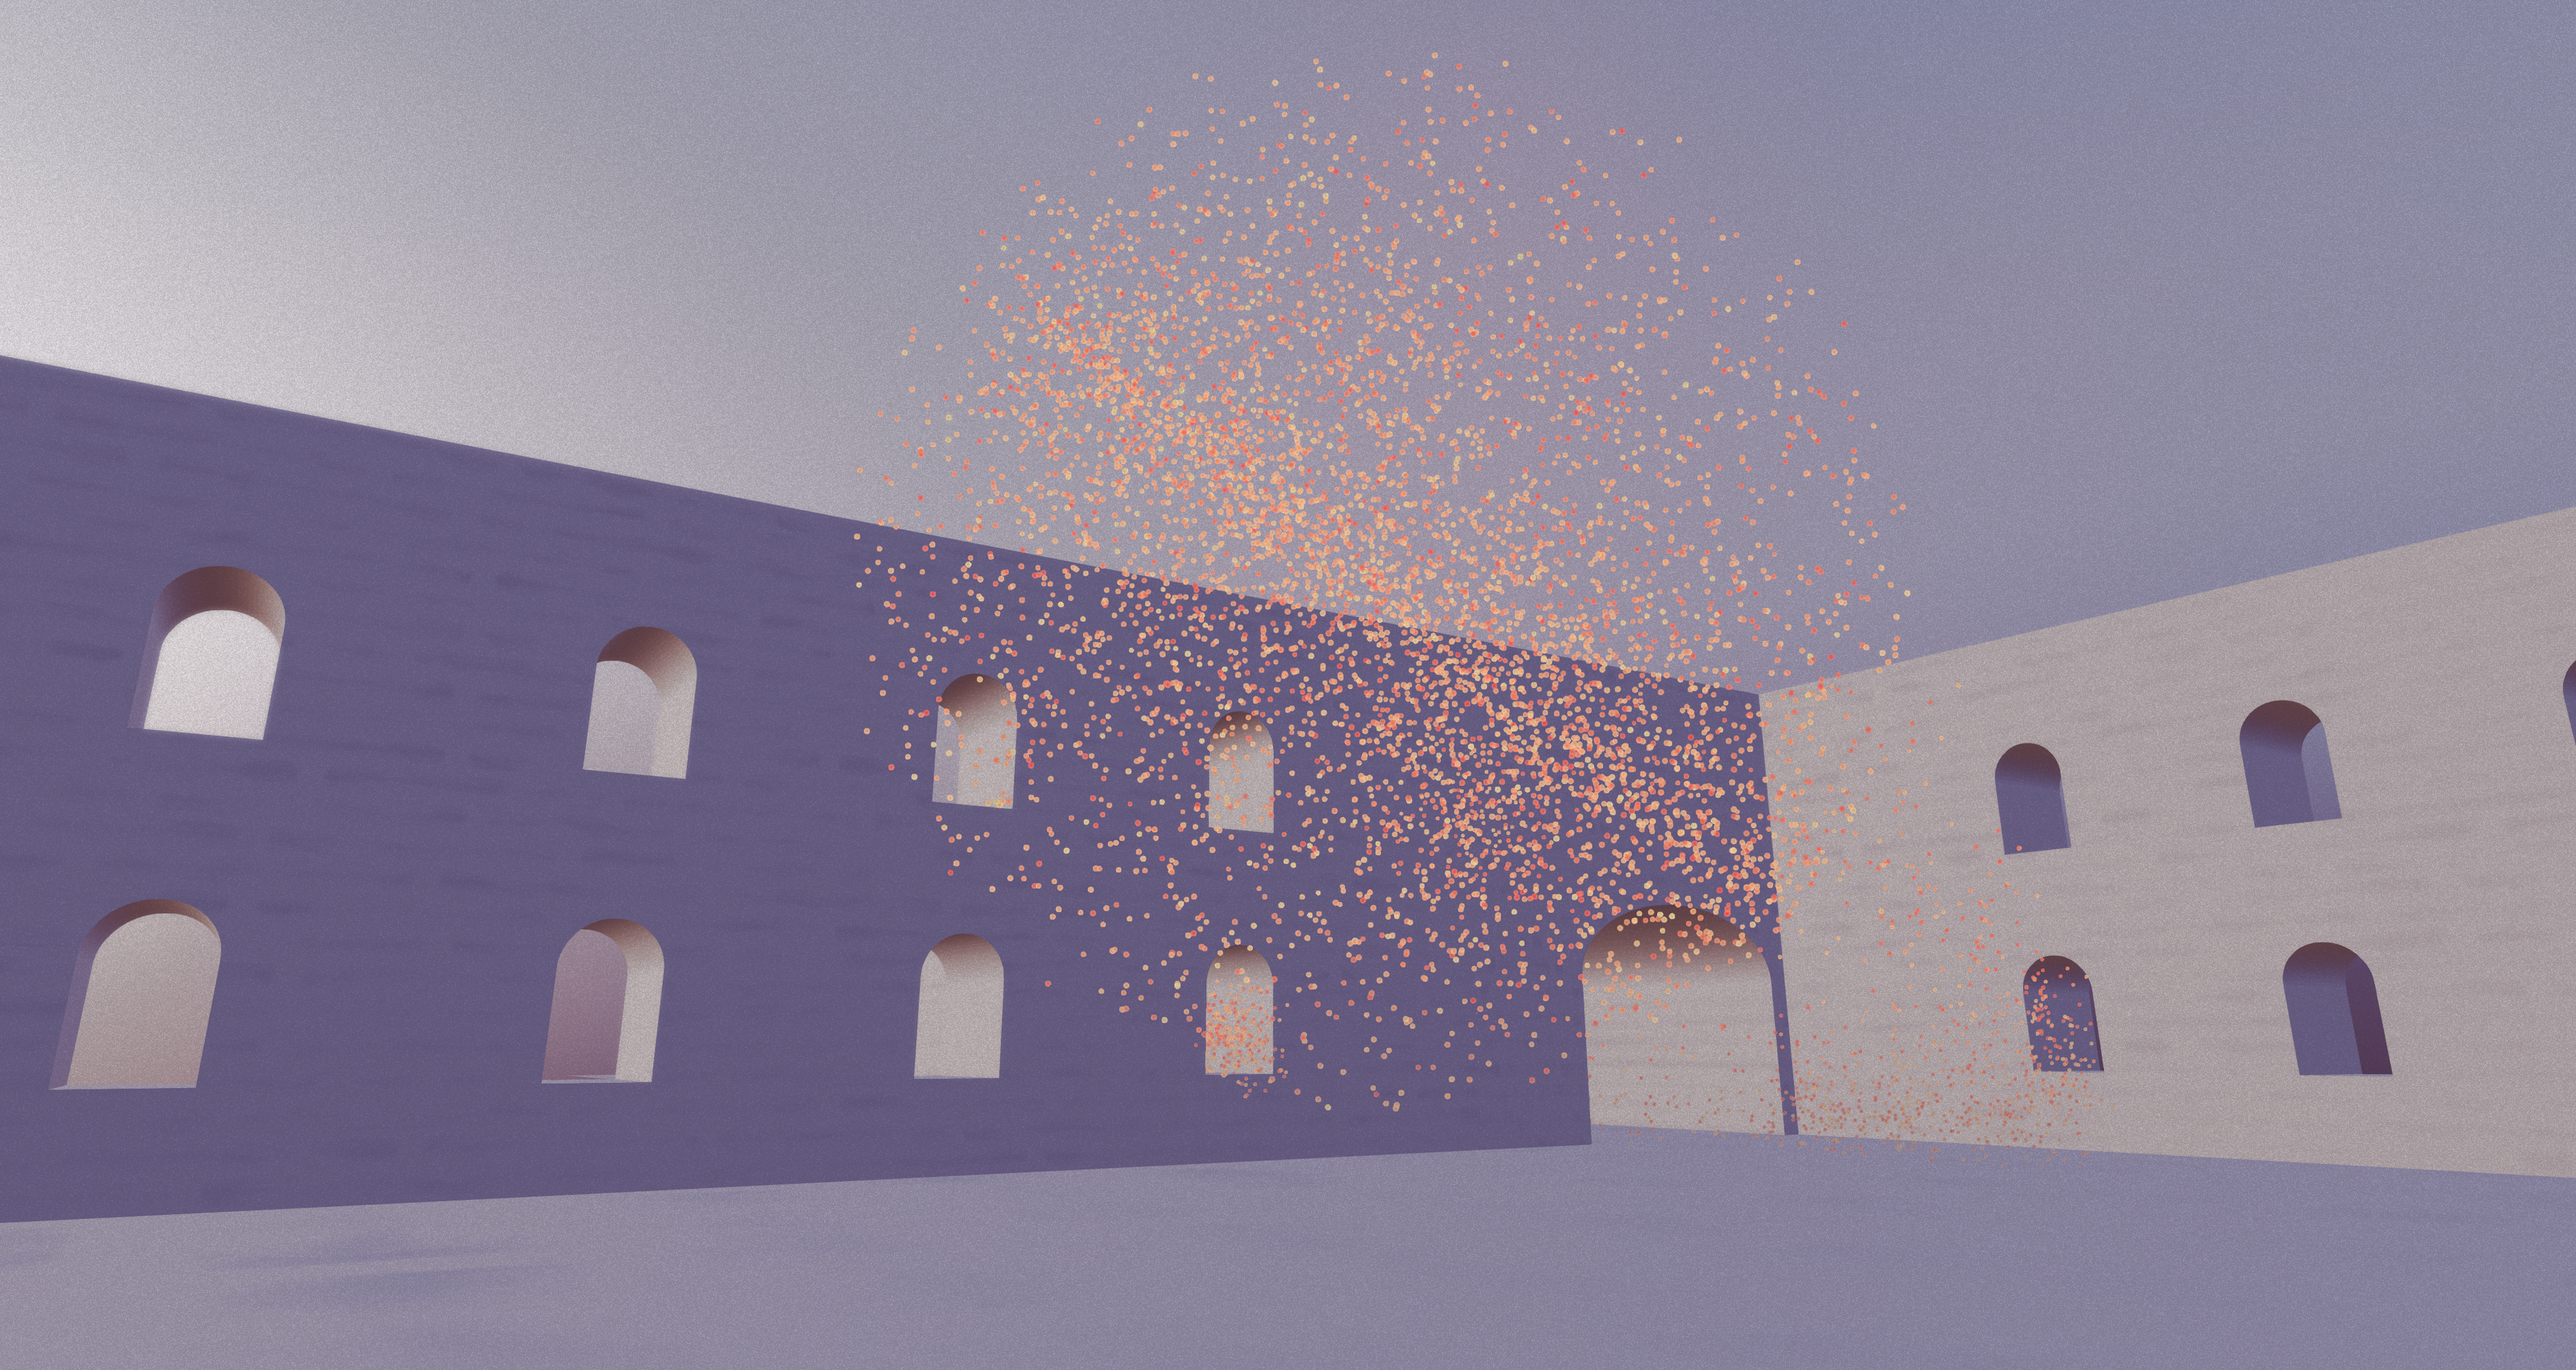 Particles flowing around Goat Farm-inspired virtual architecture.